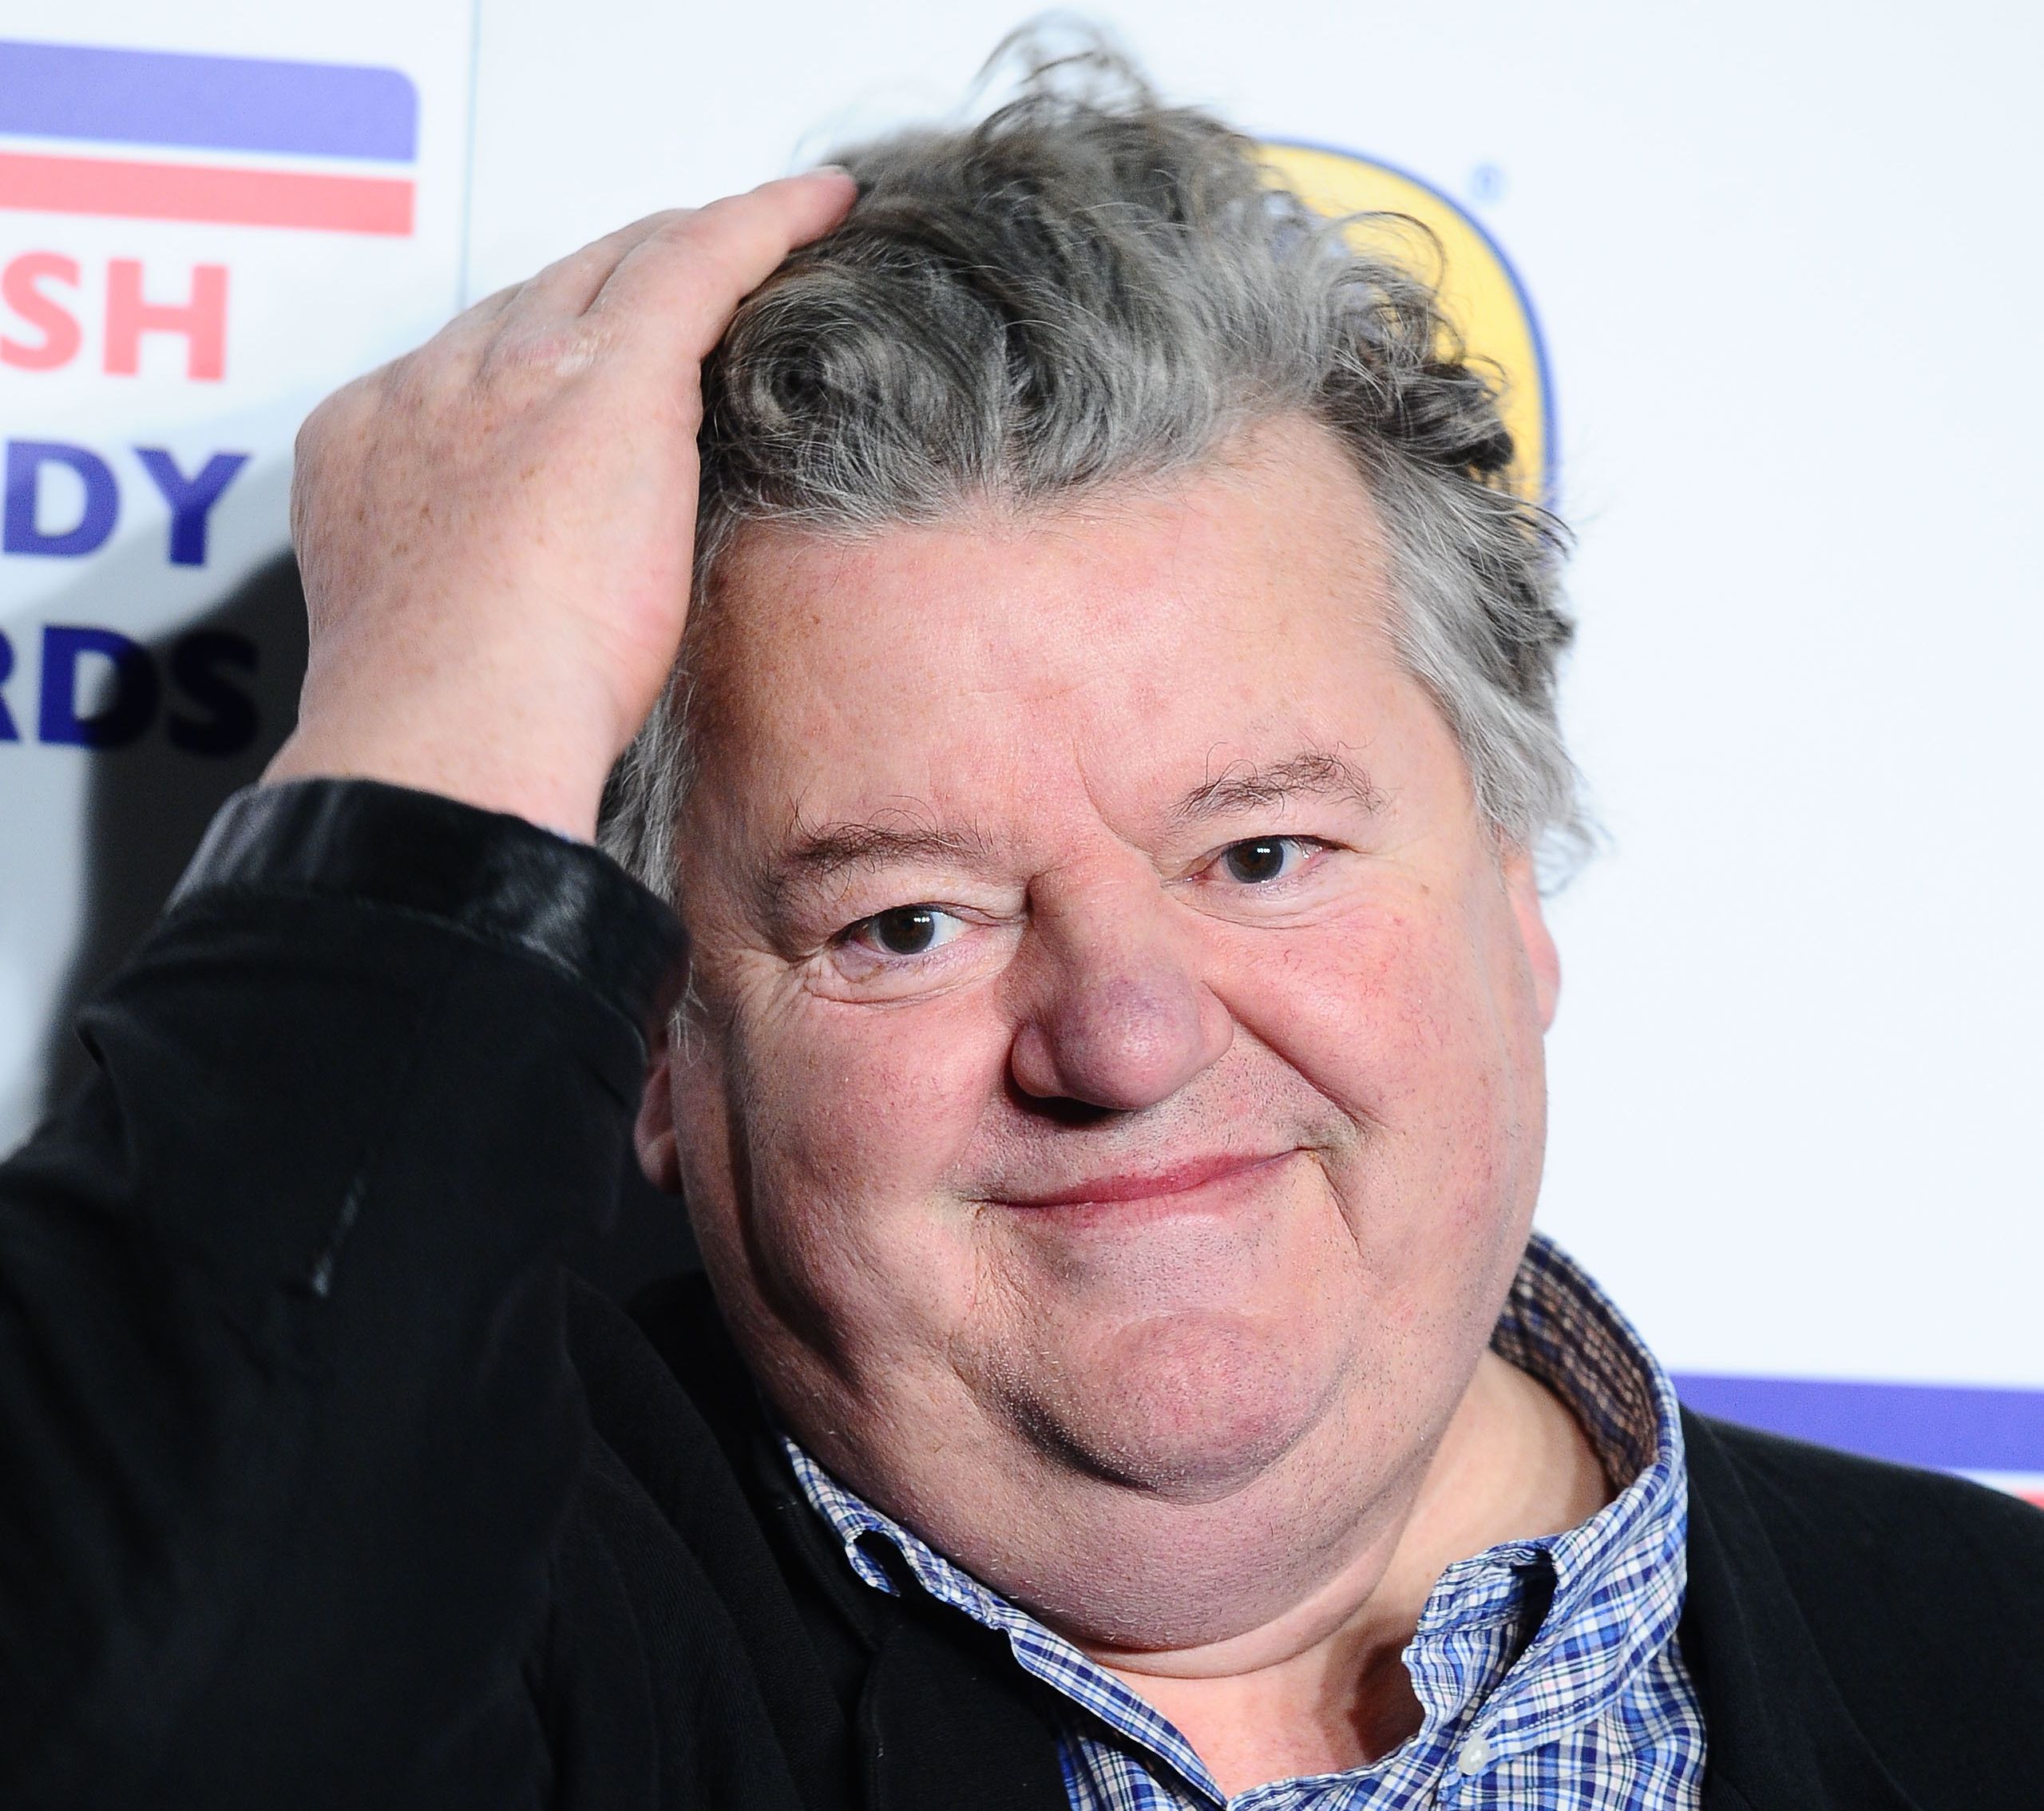 File photo dated 16/12/2011 of Robbie Coltrane arriving at the British Comedy Awards at the Fountain Studios in London. The Harry Potter and Cracker actor has died aged 72, his agent has said. Issue date: Friday October 14, 2022.